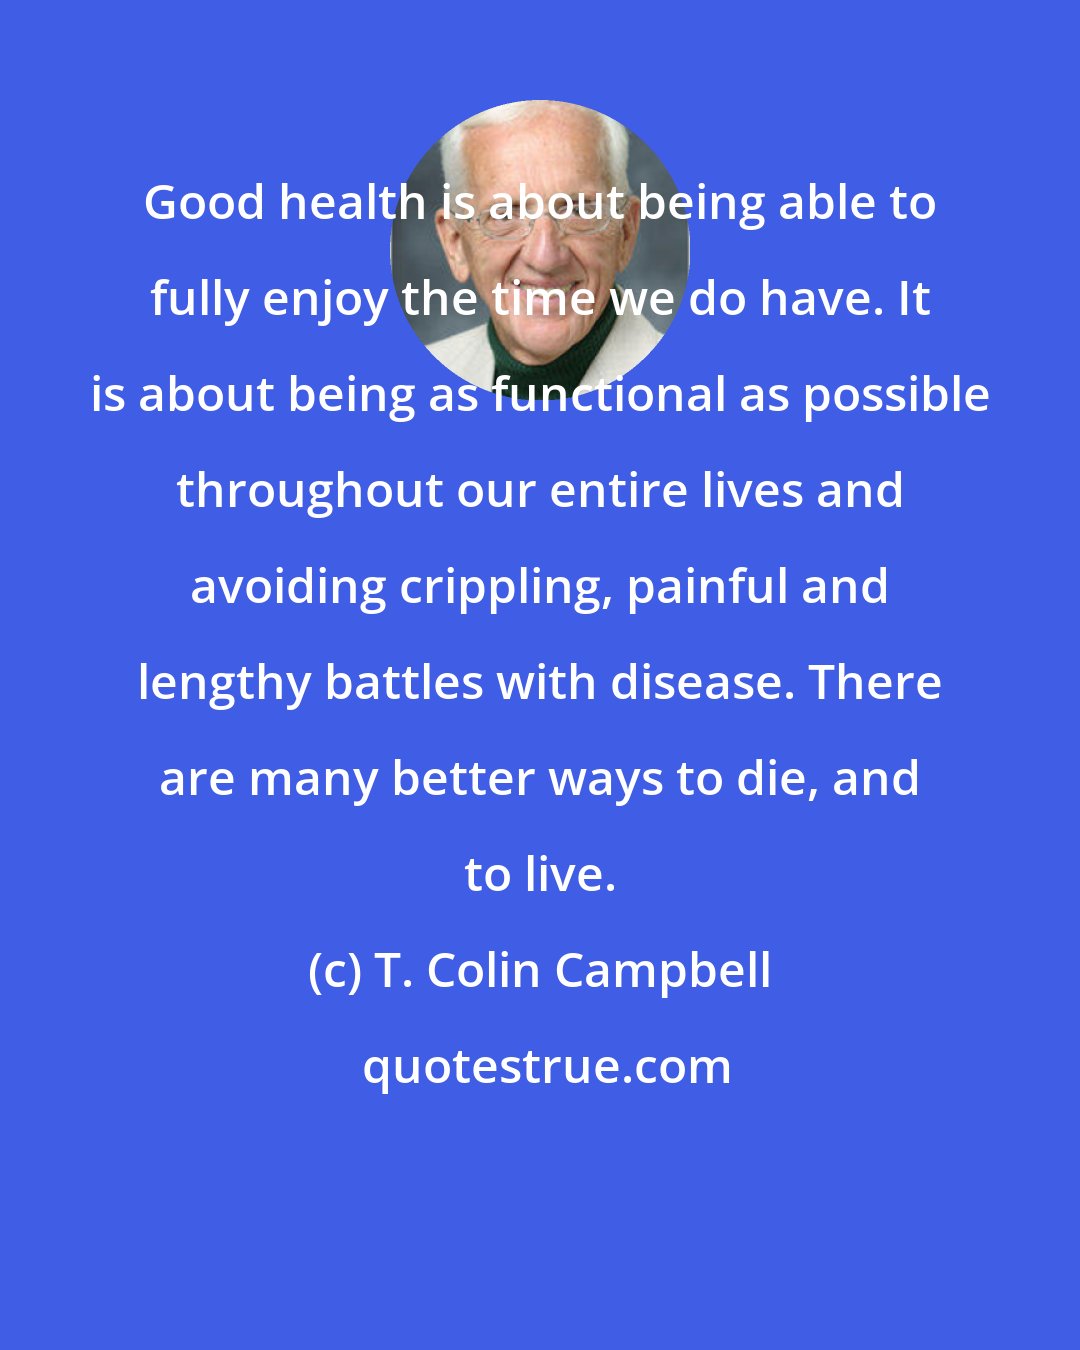 T. Colin Campbell: Good health is about being able to fully enjoy the time we do have. It is about being as functional as possible throughout our entire lives and avoiding crippling, painful and lengthy battles with disease. There are many better ways to die, and to live.